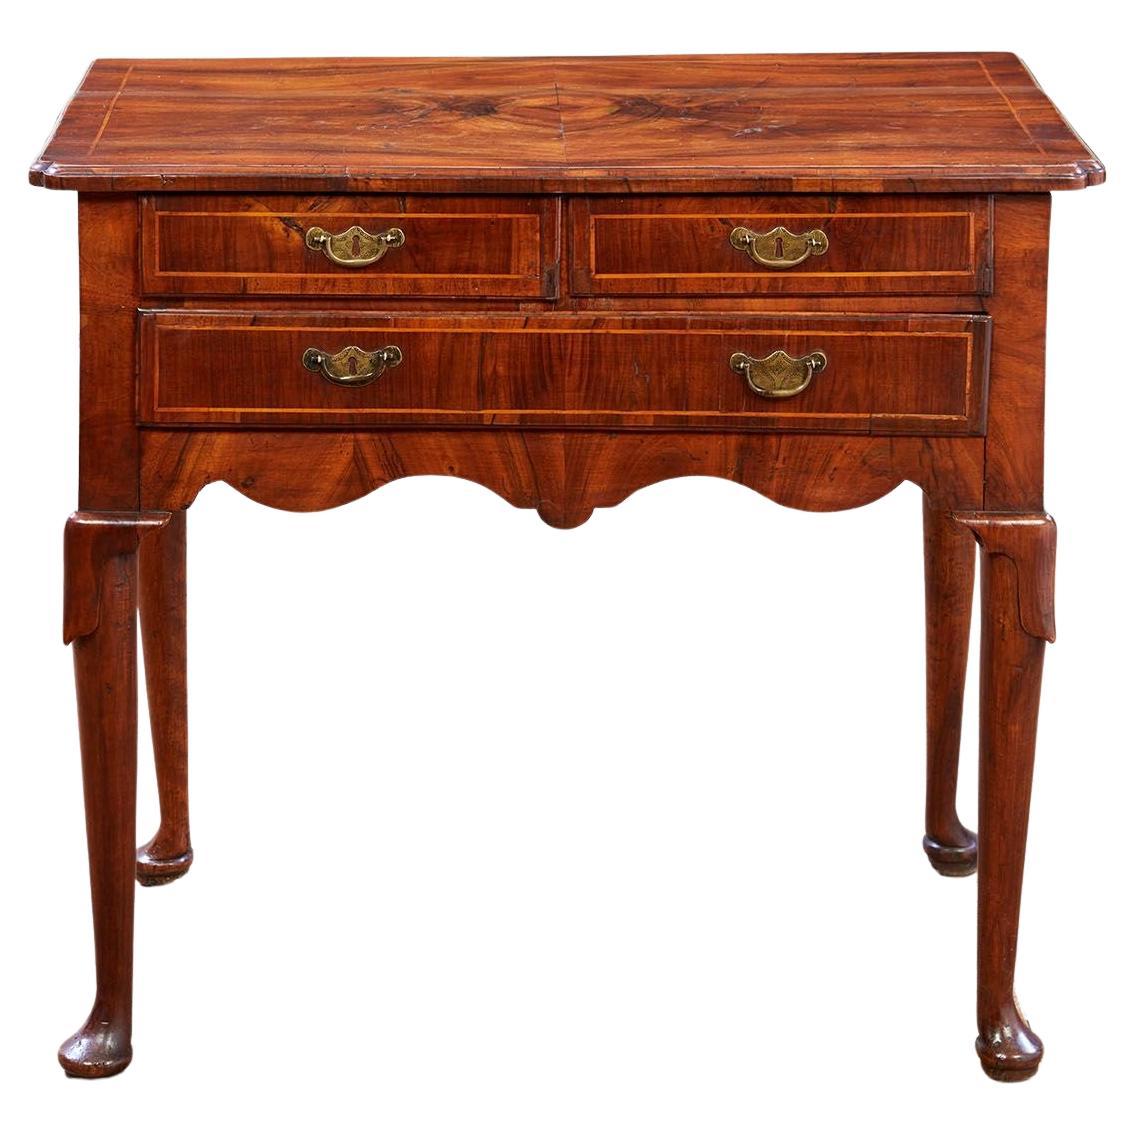 Exquisite Early English Lowboy For Sale